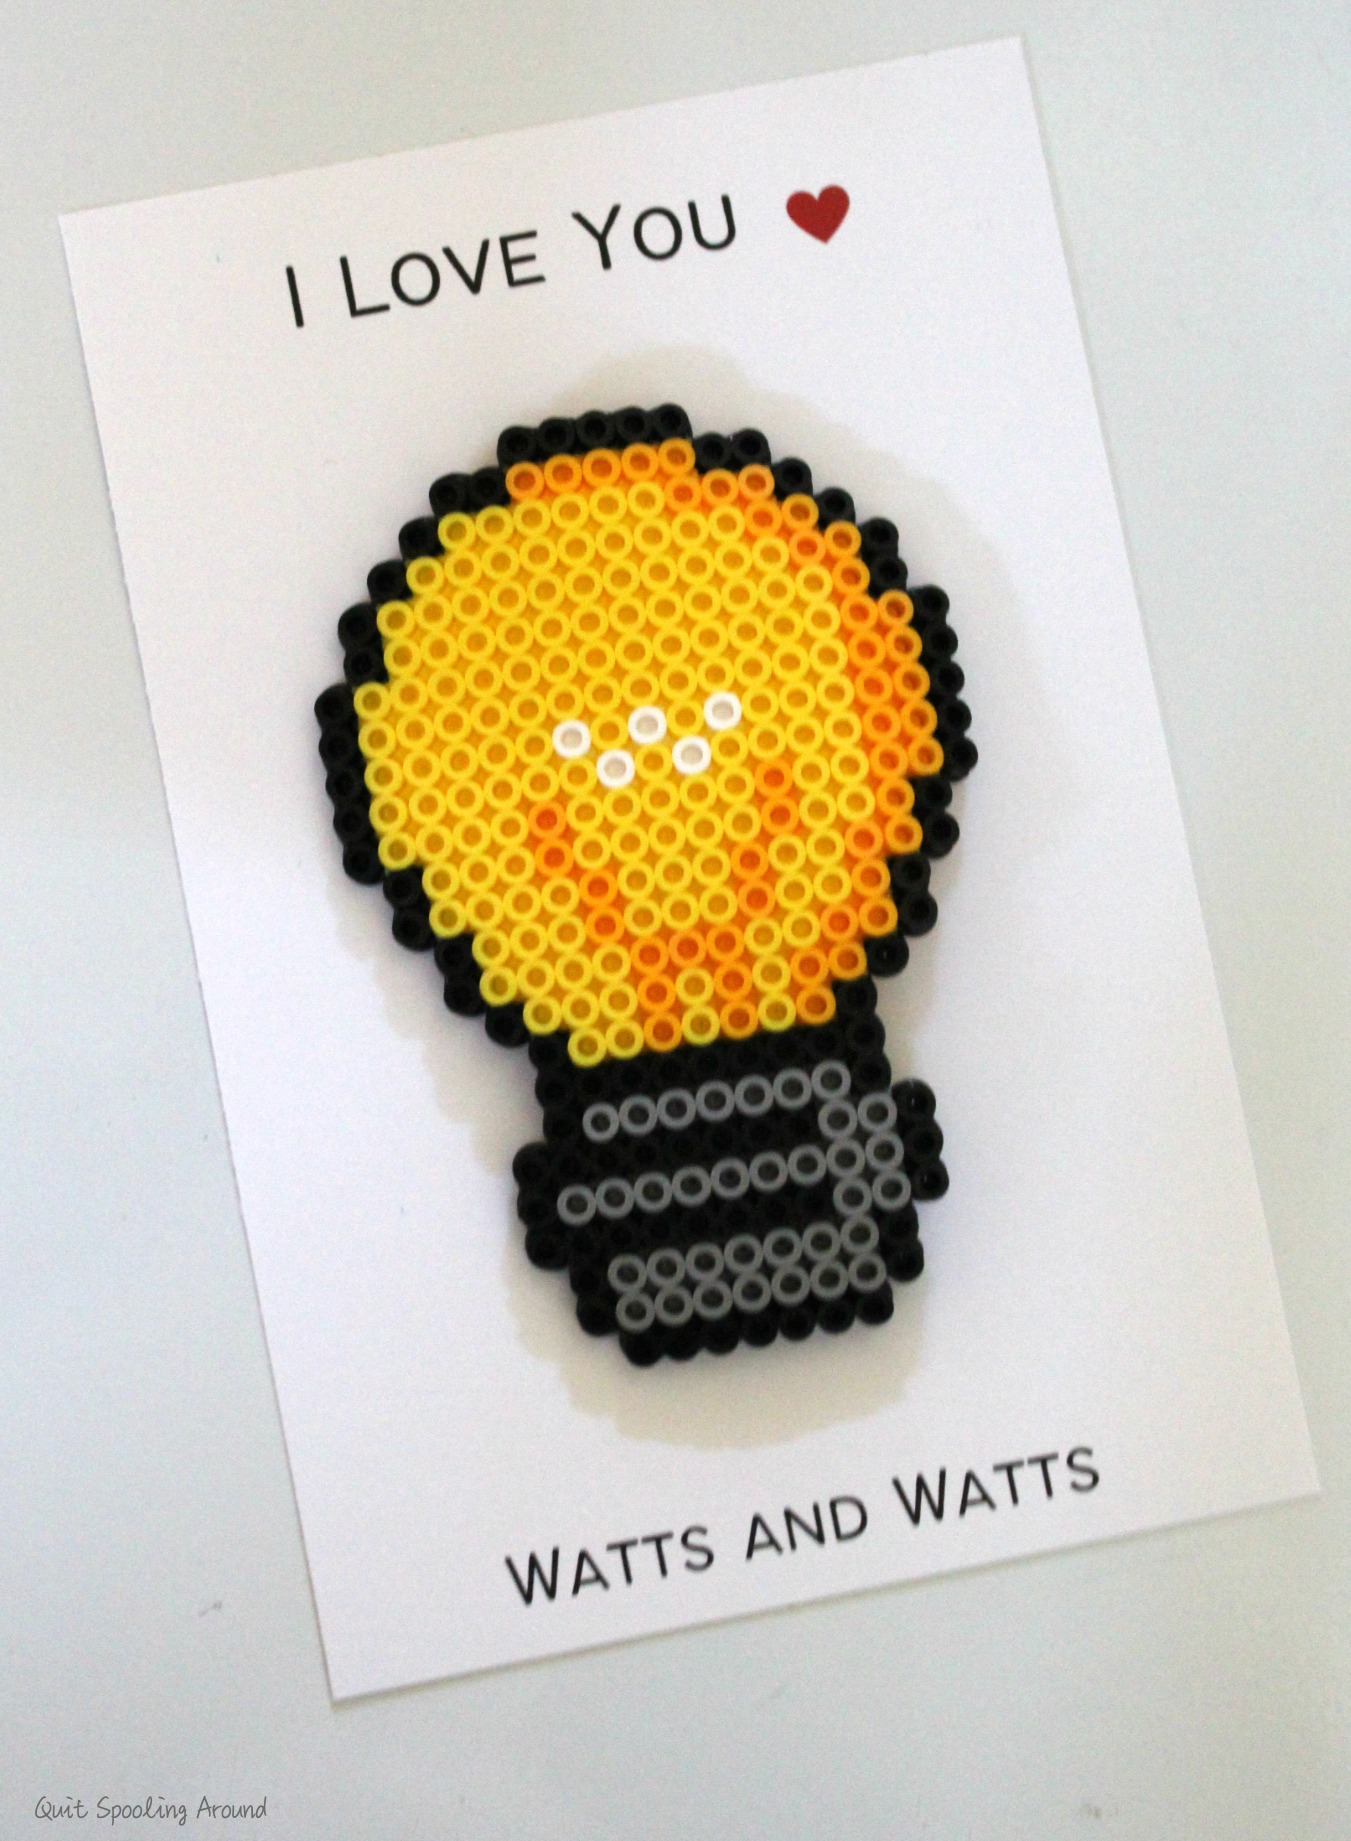 <span itemprop="name">I Love You Watts and Watts!</span>